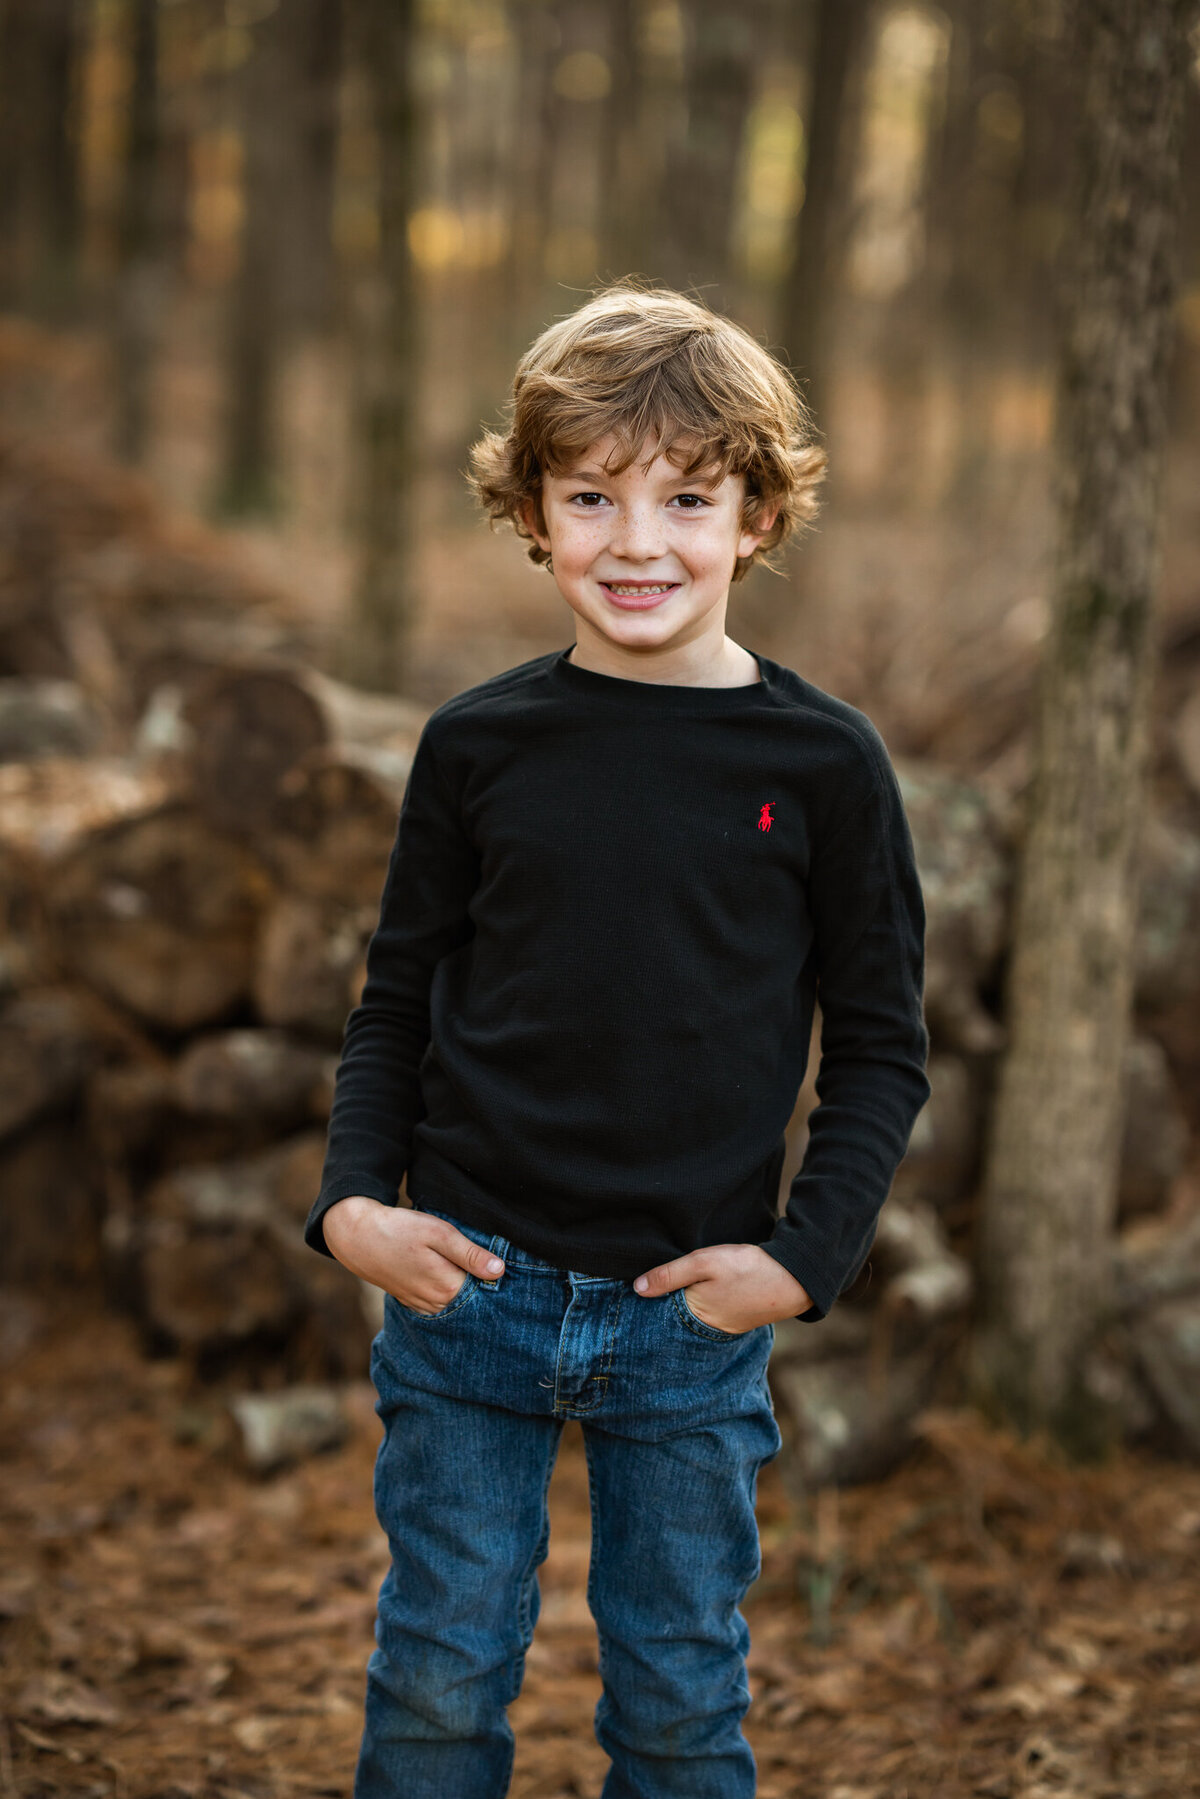 A young boy in a black shirt stands in the woods and smiles for the camera at his photoshoot.